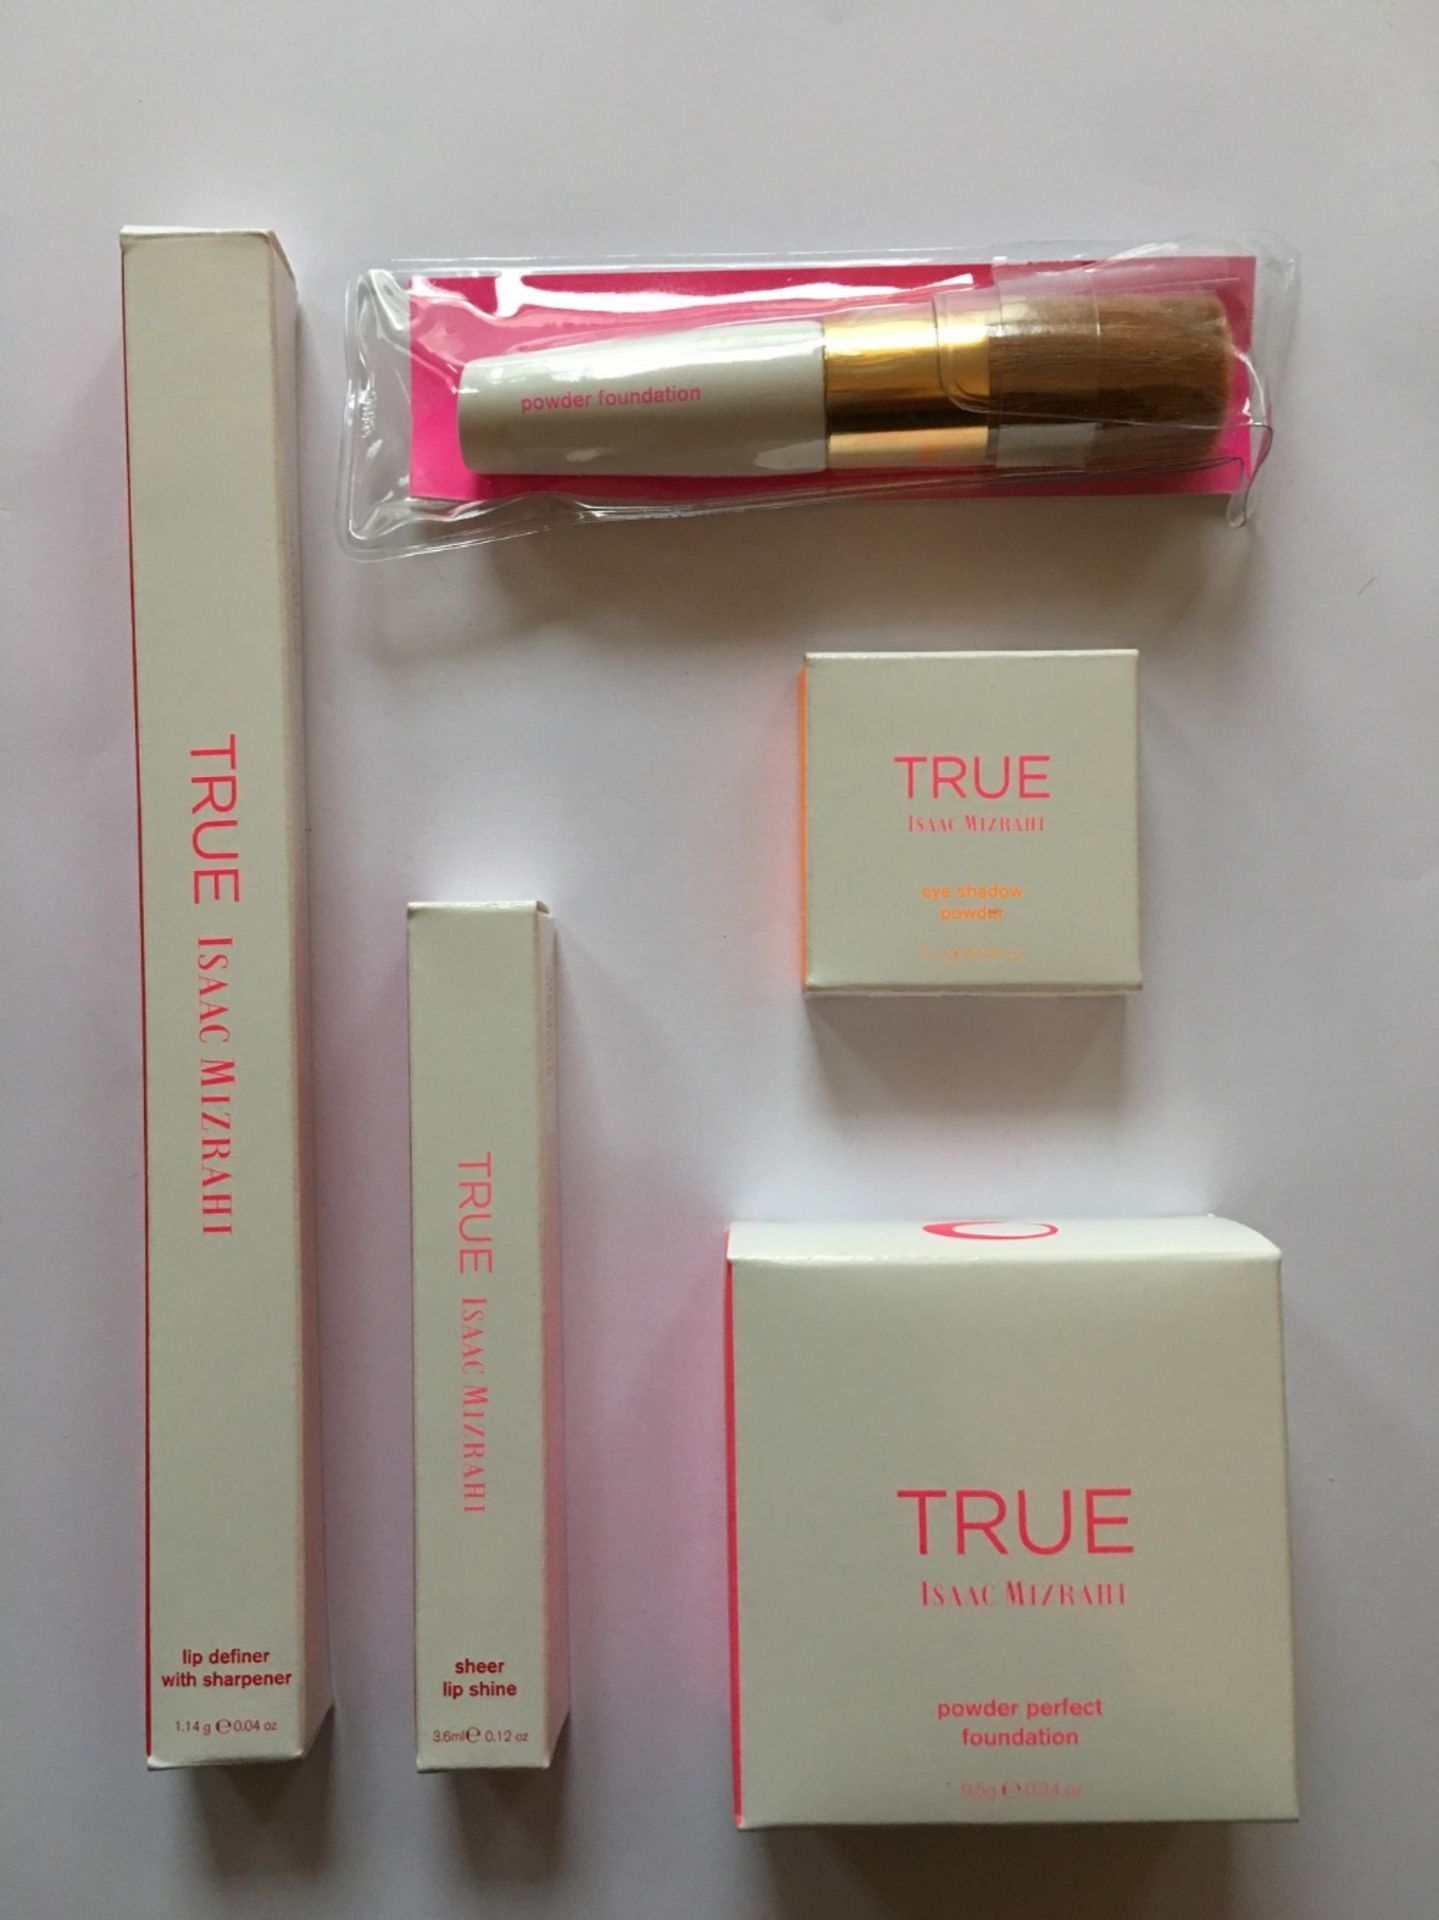 100 x True by issac Mizrahi 5 item gift set –4 - Each set is individually packed in a padded